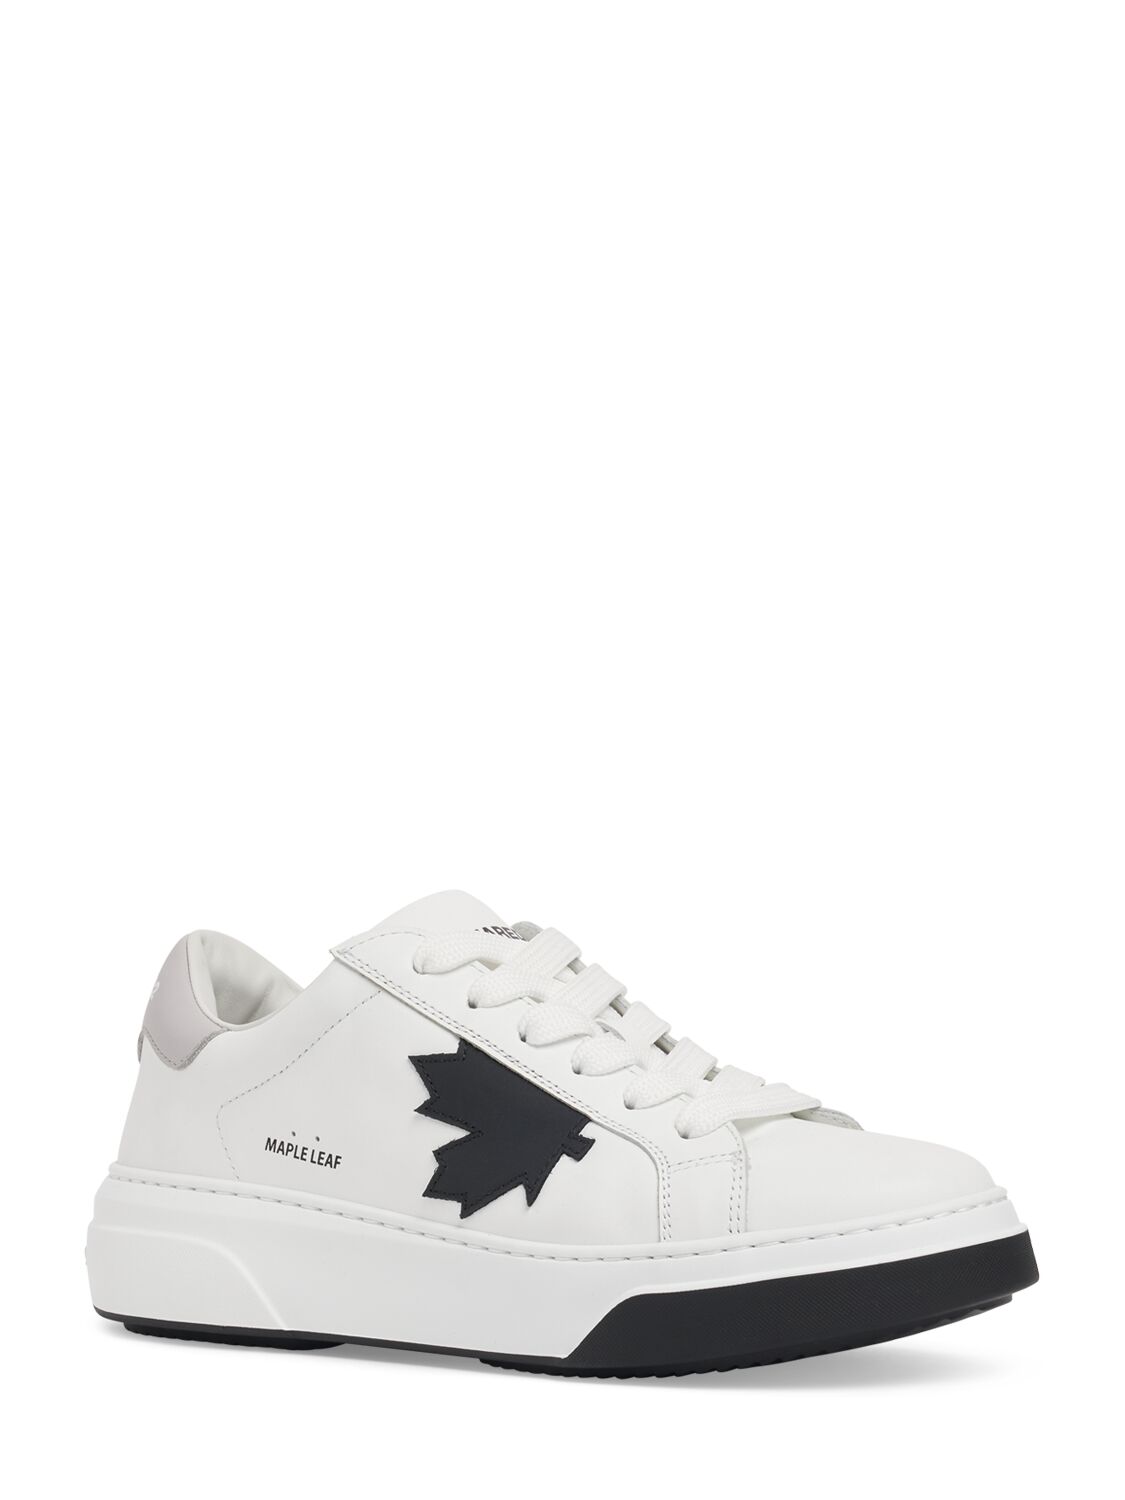 Shop Dsquared2 Bumper Low Top Sneakers In White,black